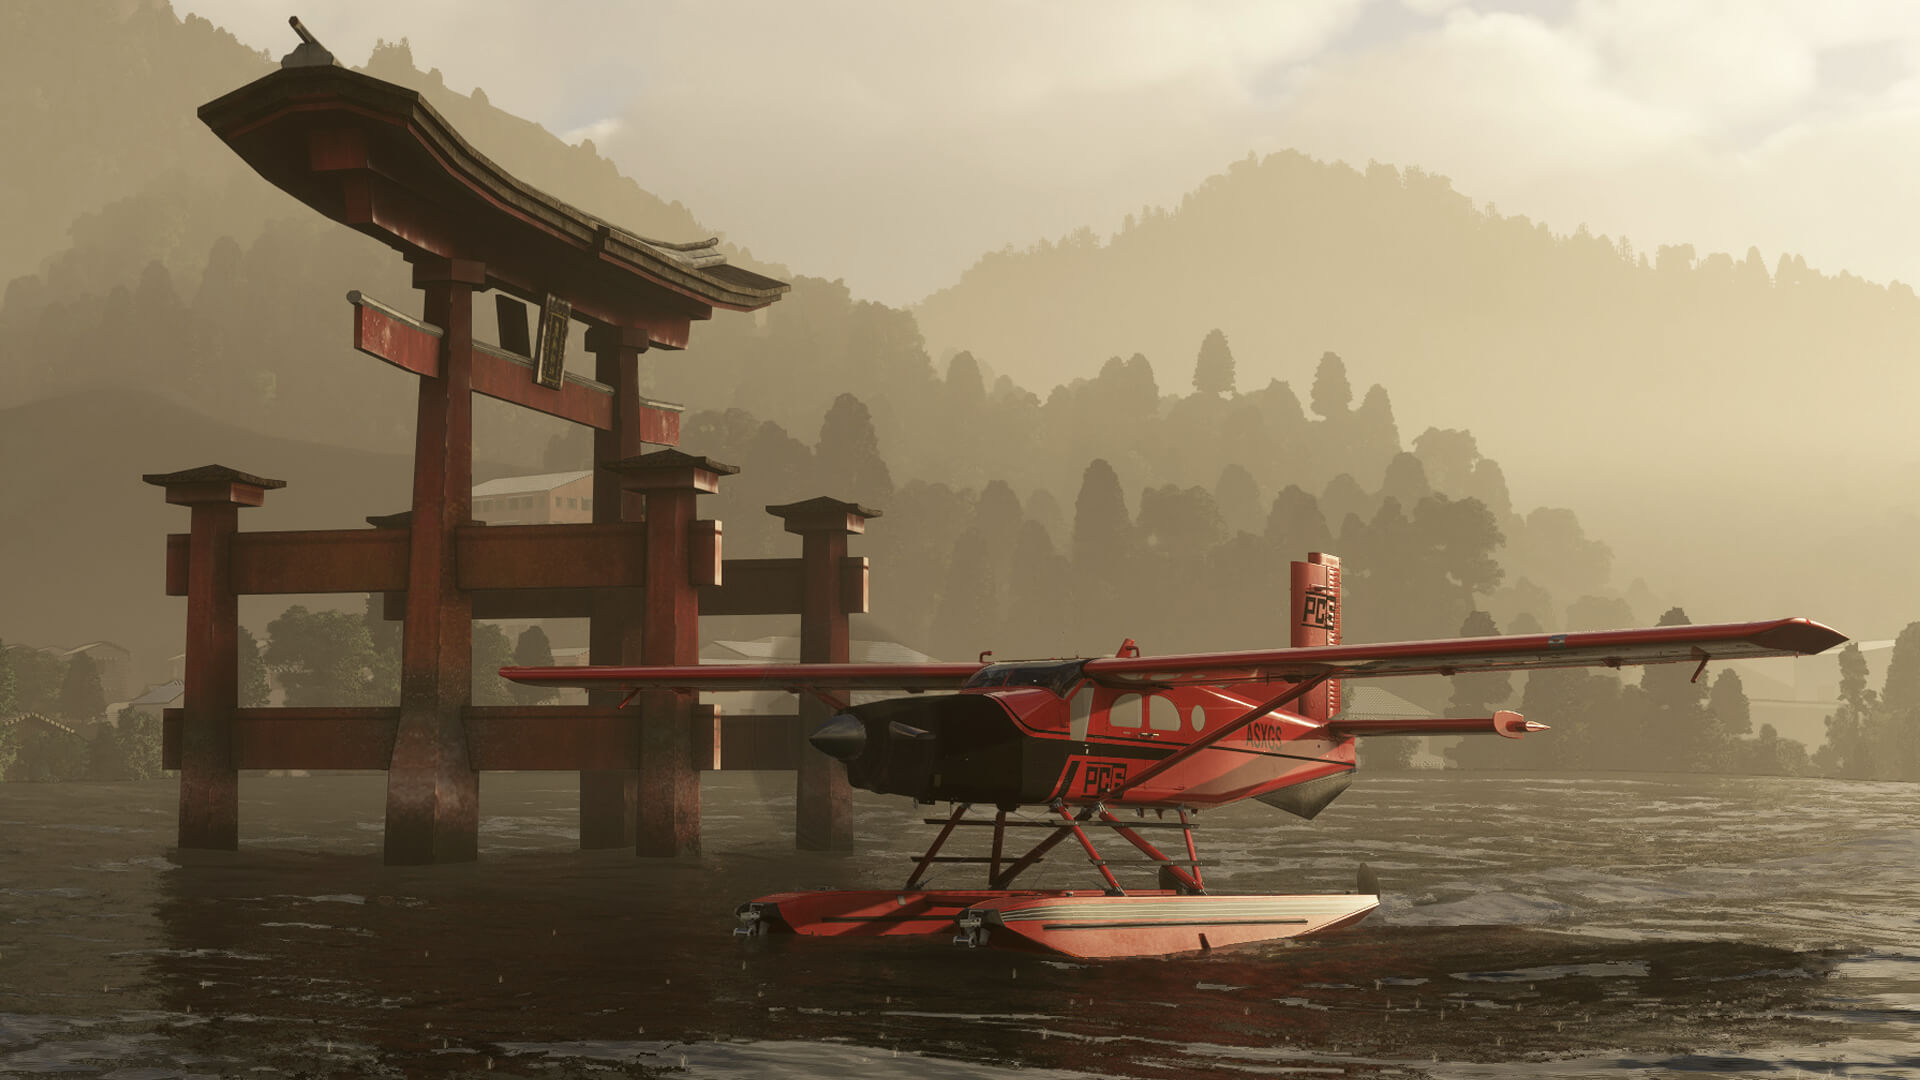 A water float propeller PC-6 sits in the rain with engine running next to a Japanese monument